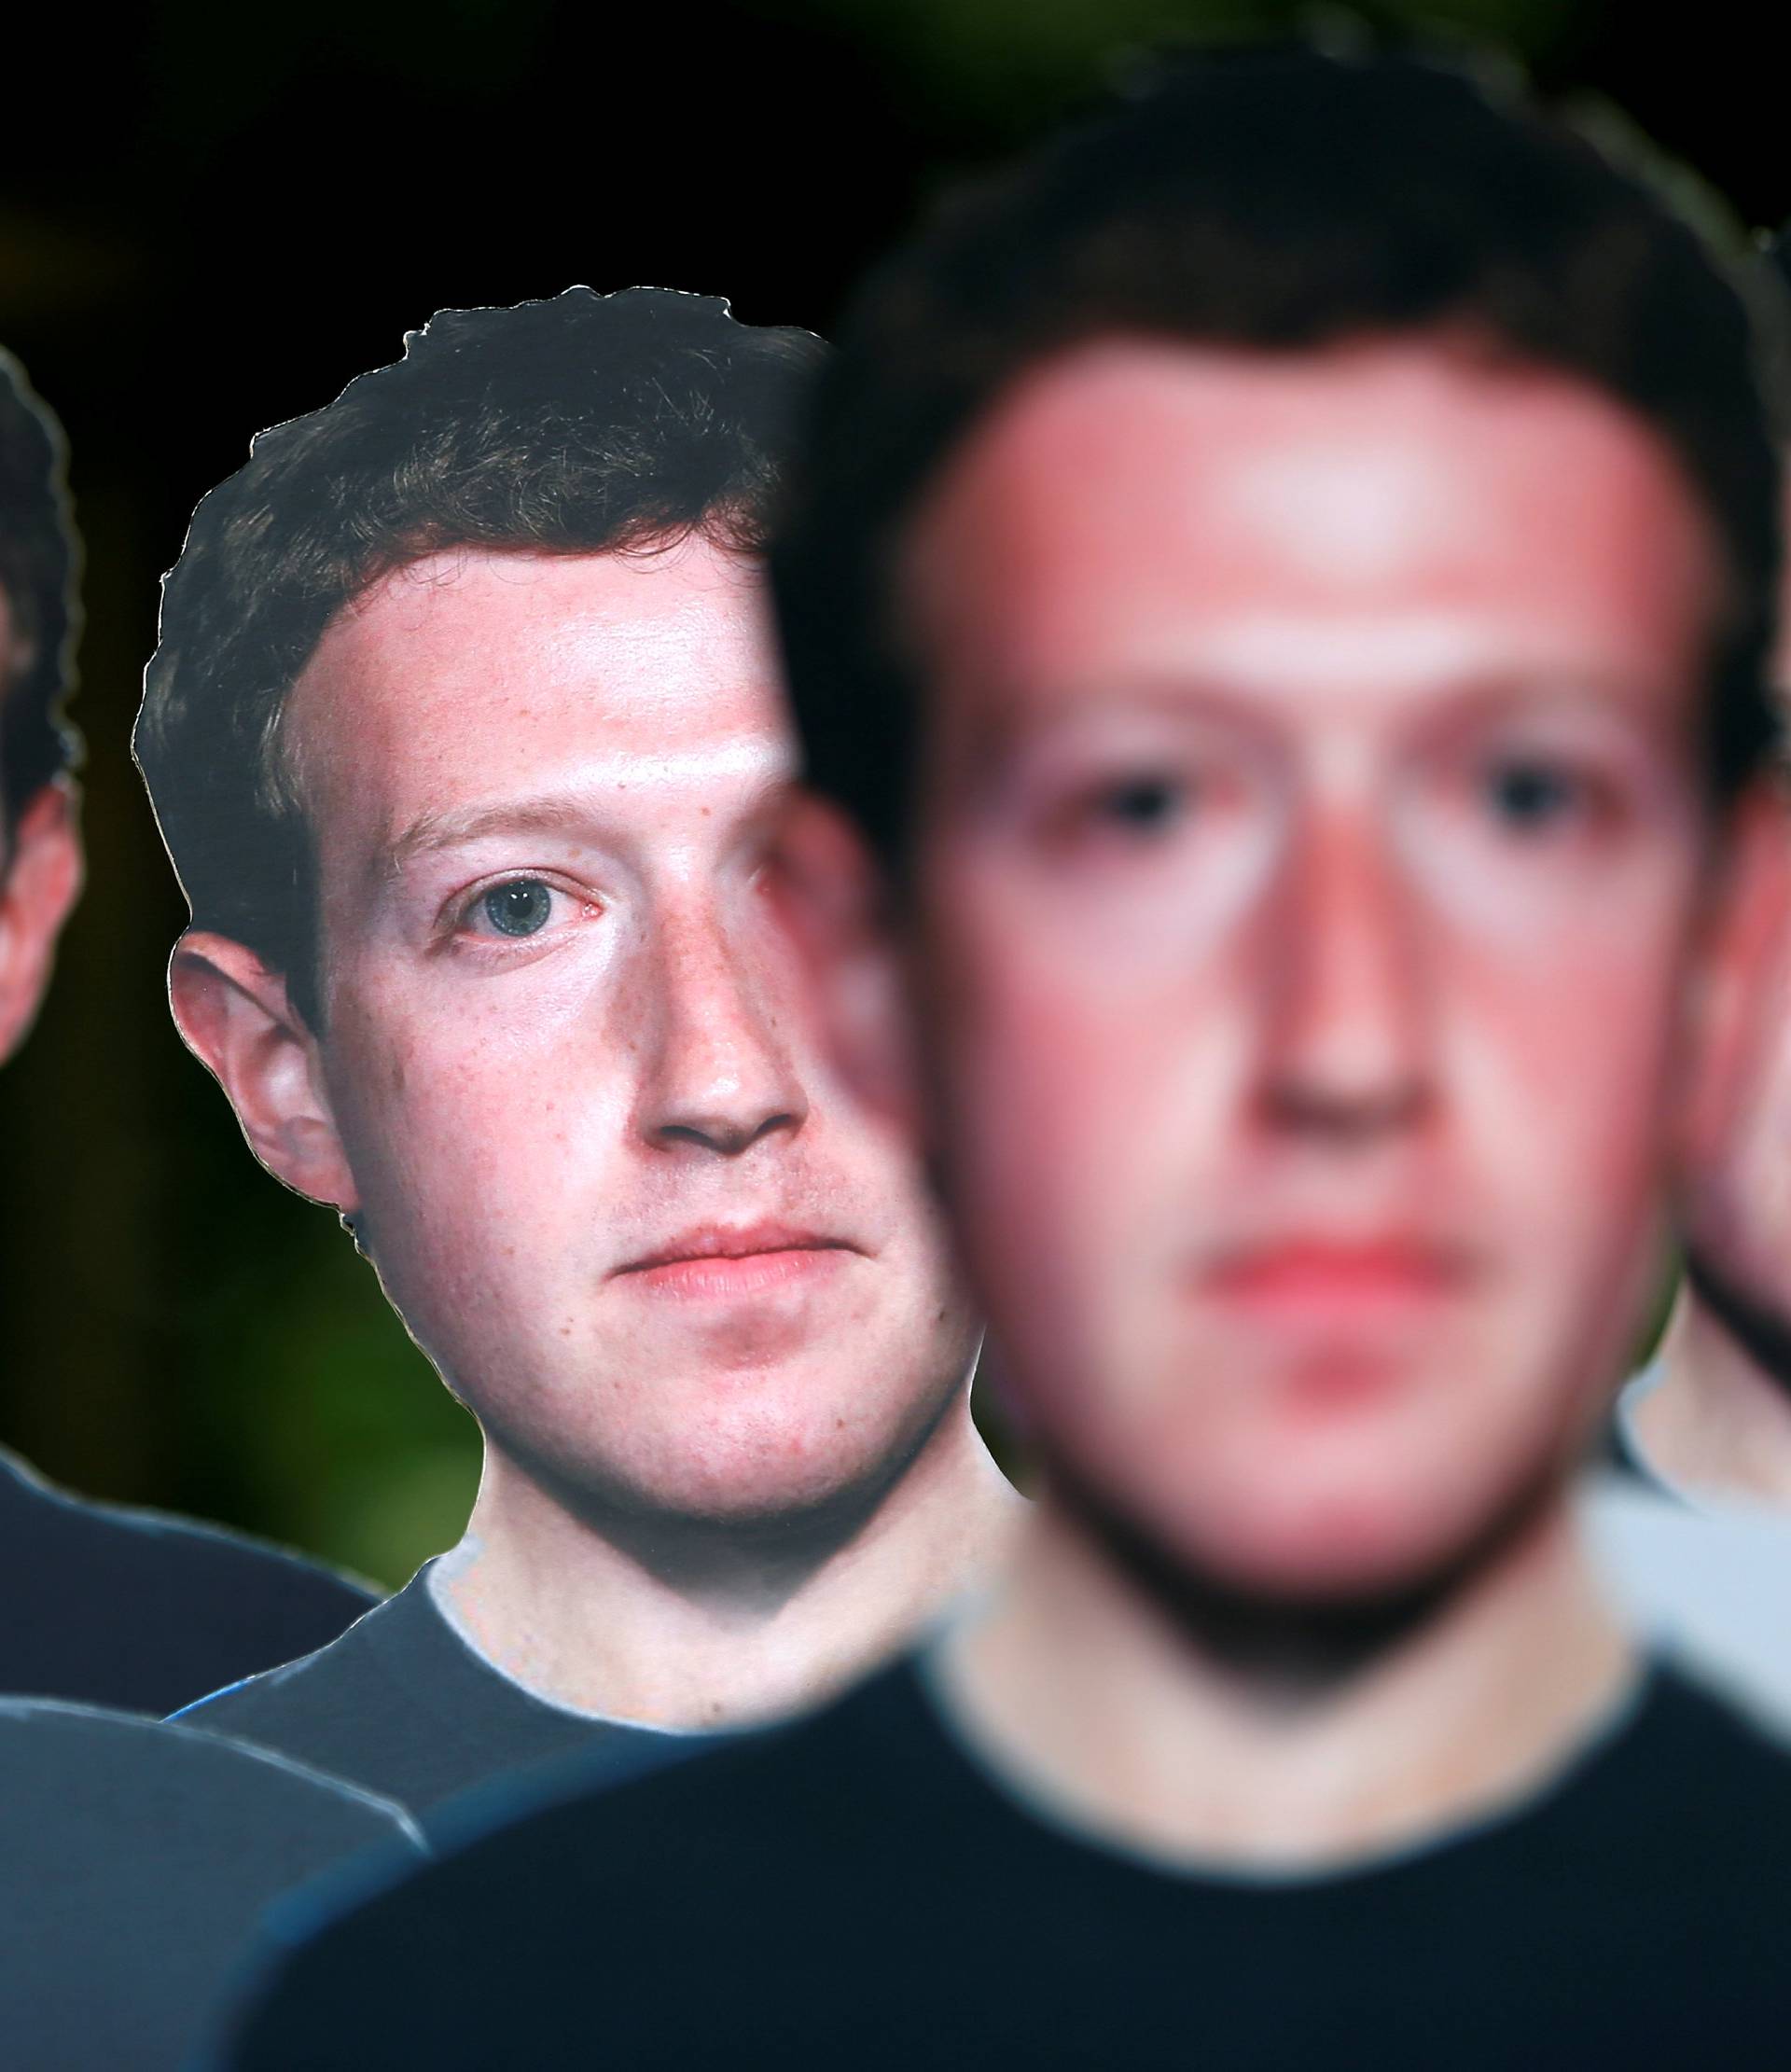 Cardboard cutouts depicting Facebook CEO Zuckerberg are pictured during a demonstration in Brussels